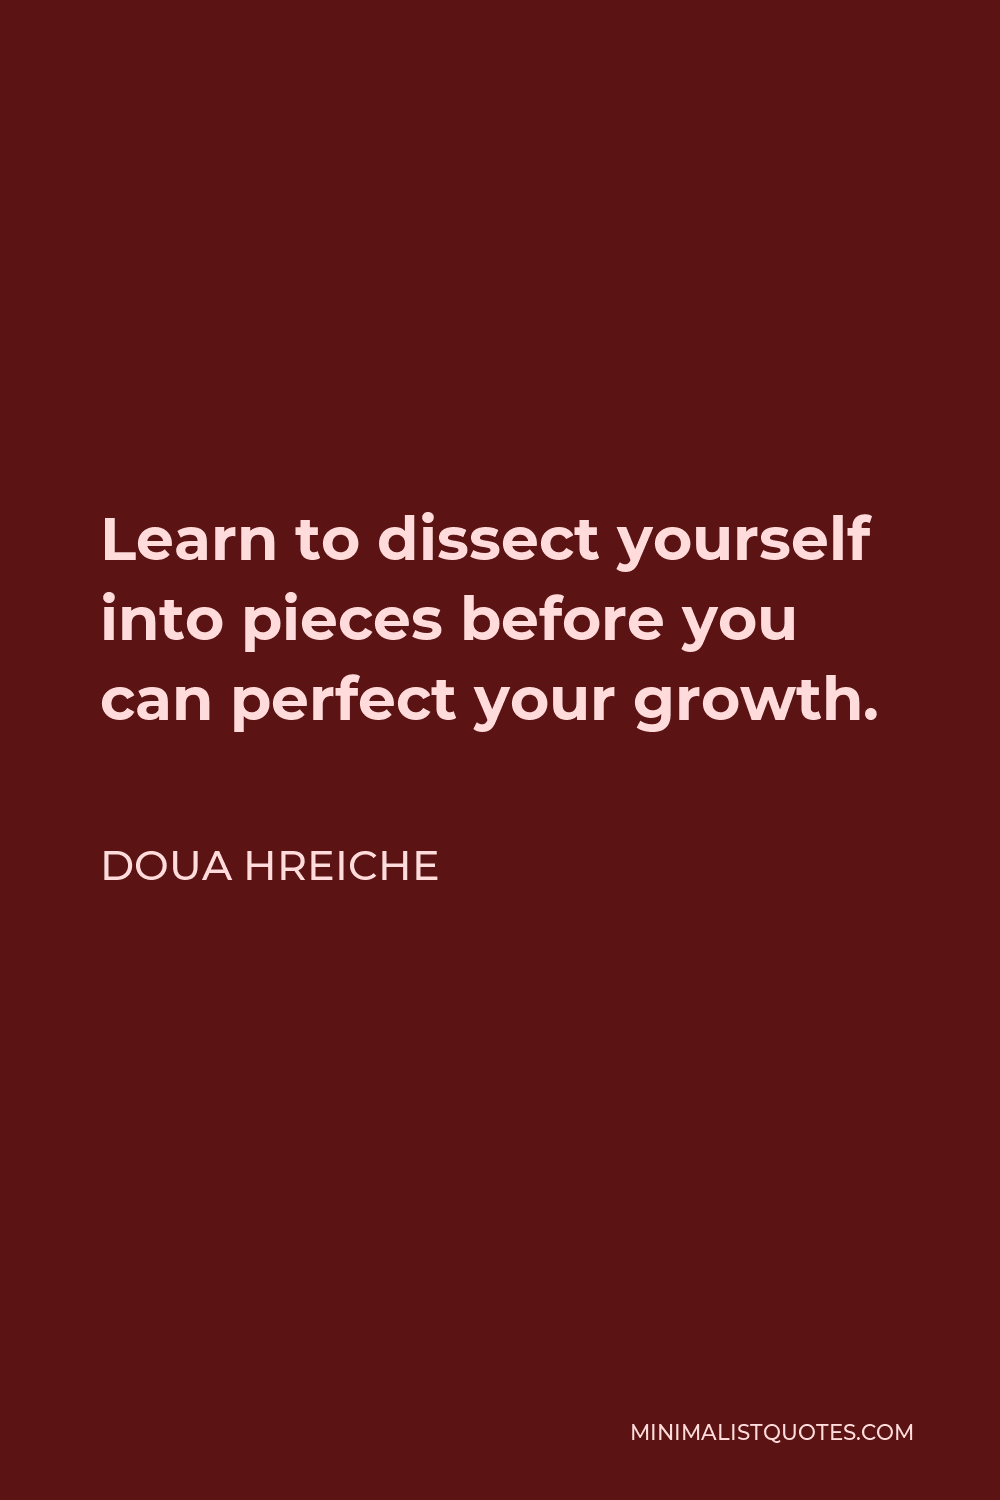 Doua Hreiche Quote - Learn to dissect yourself into pieces before you can perfect your growth.